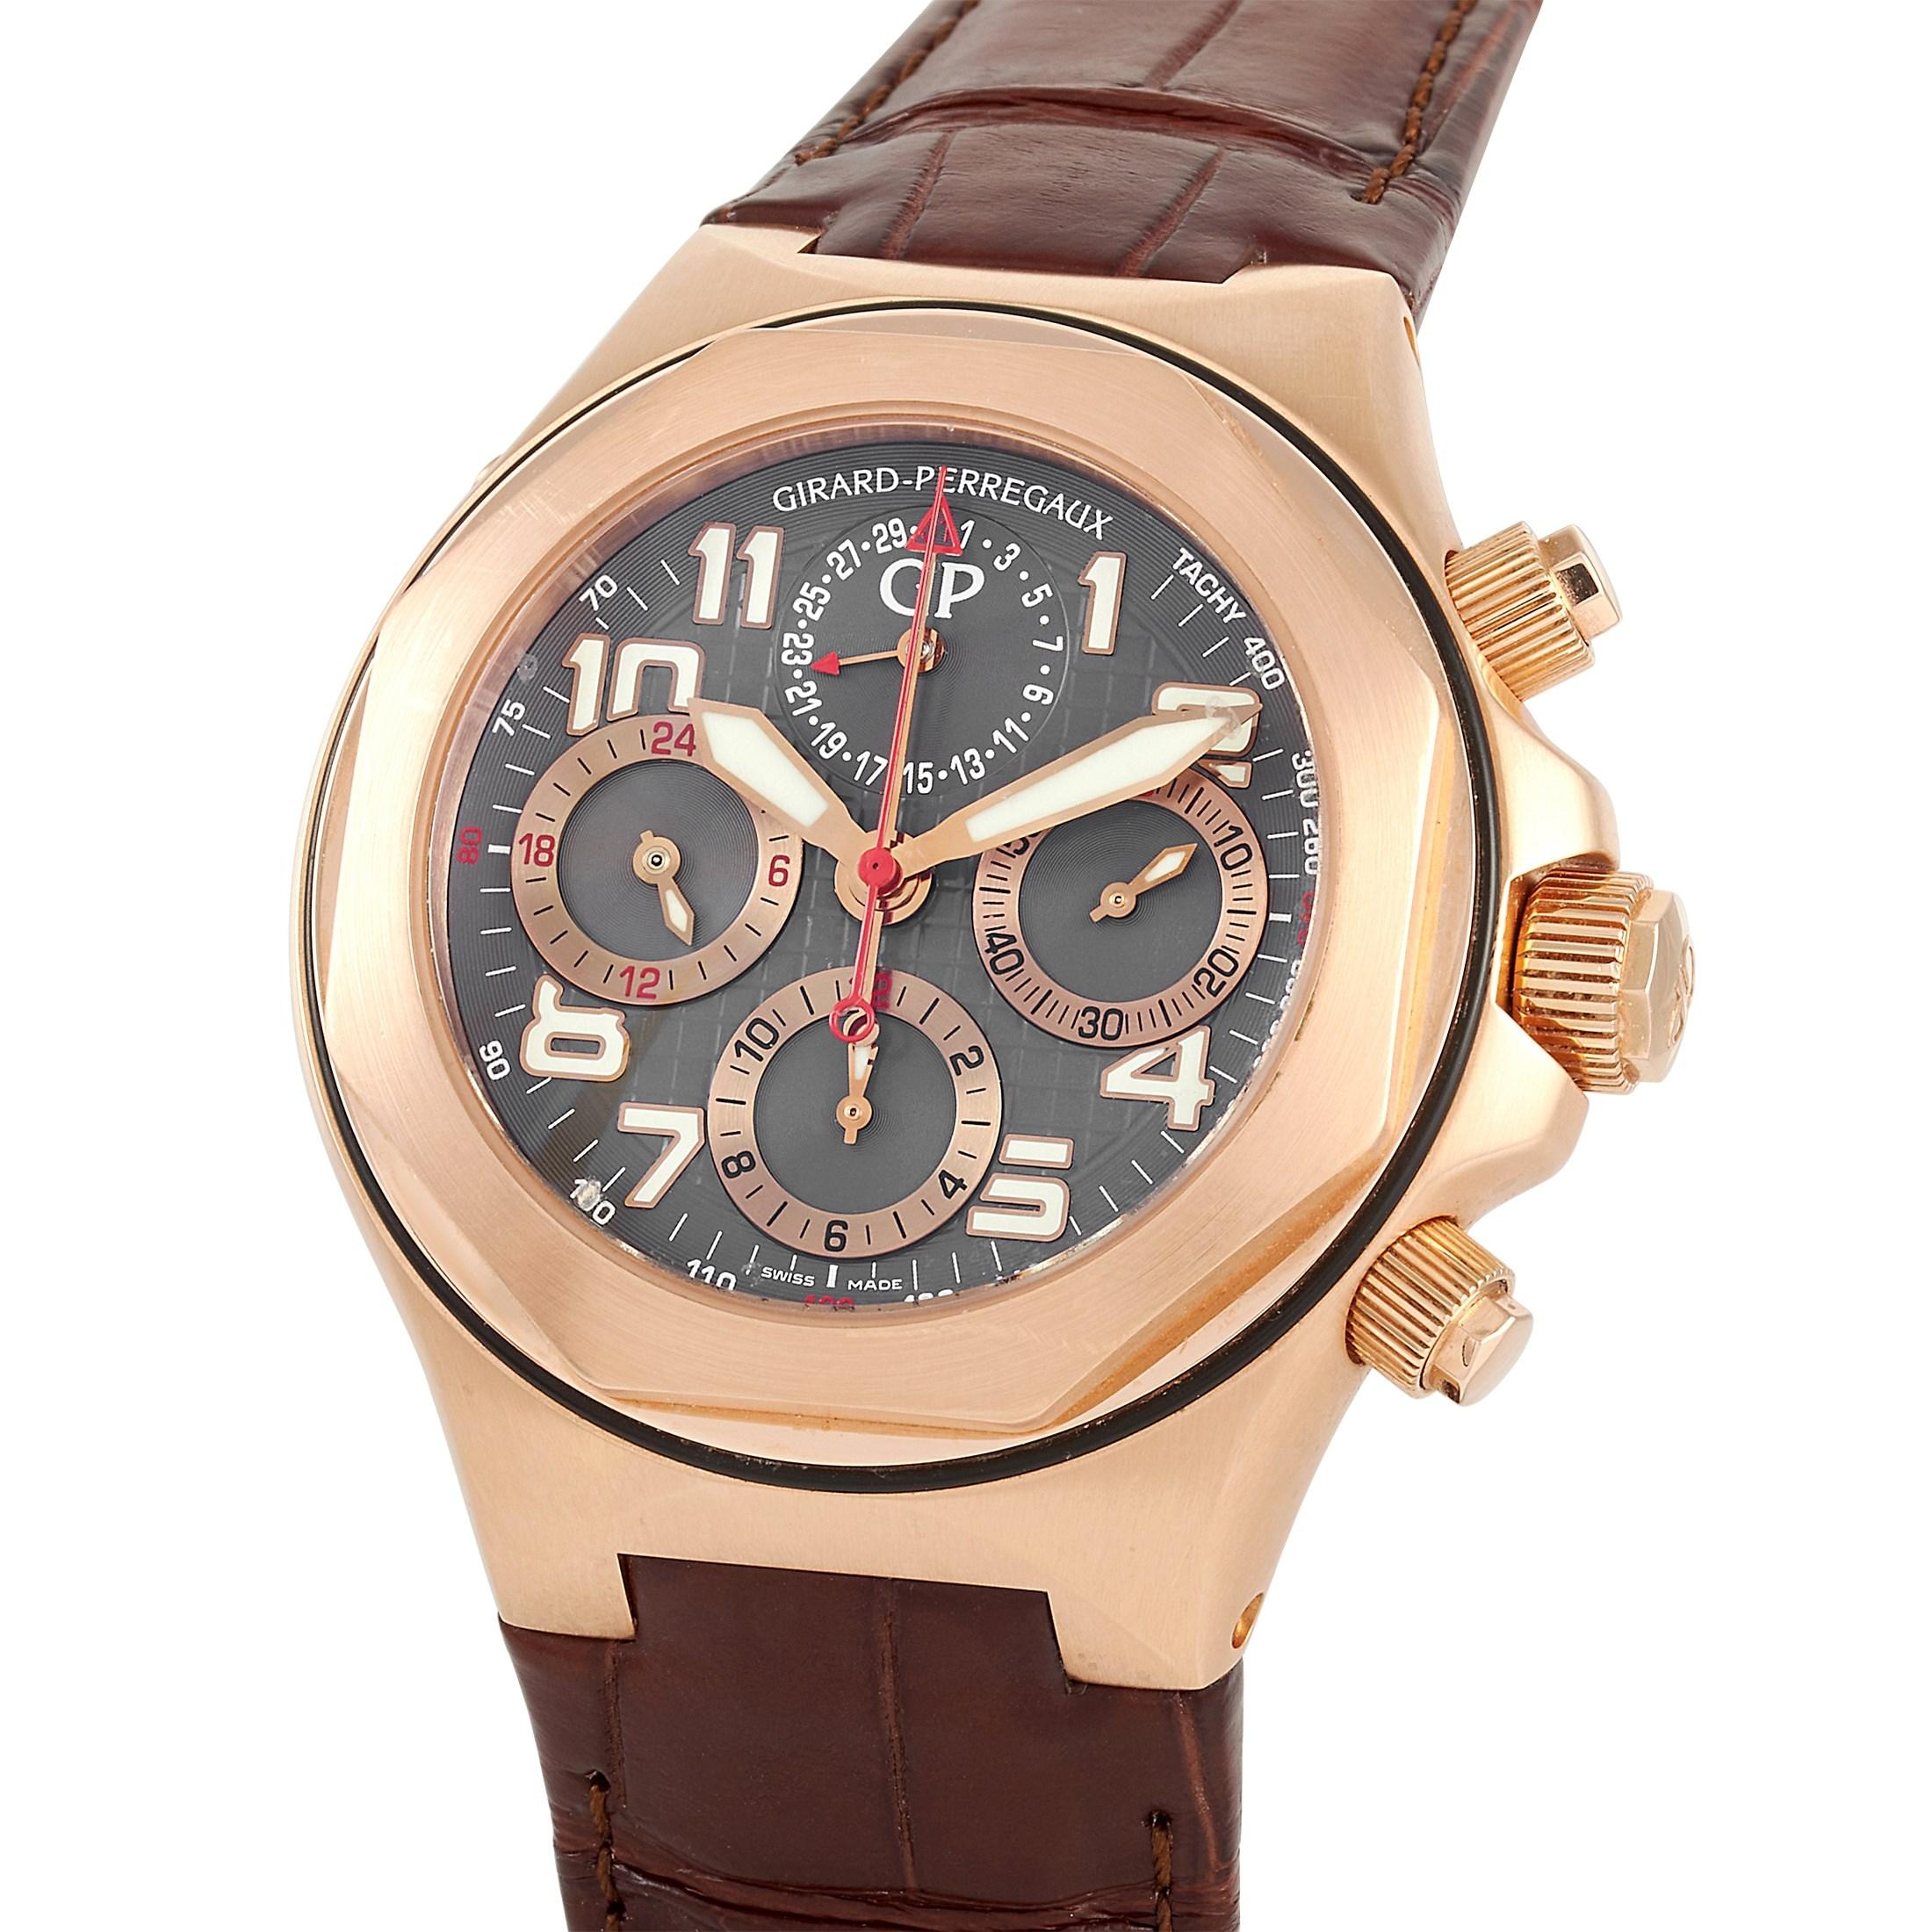 Displaying neat casework, this timepiece stands out with its non-flat look. The three-dimensional dial is deeply textured and features applied Arabic numeral hour markers and three applied rings for three sub-dials. The 44m wide 18K rose gold case